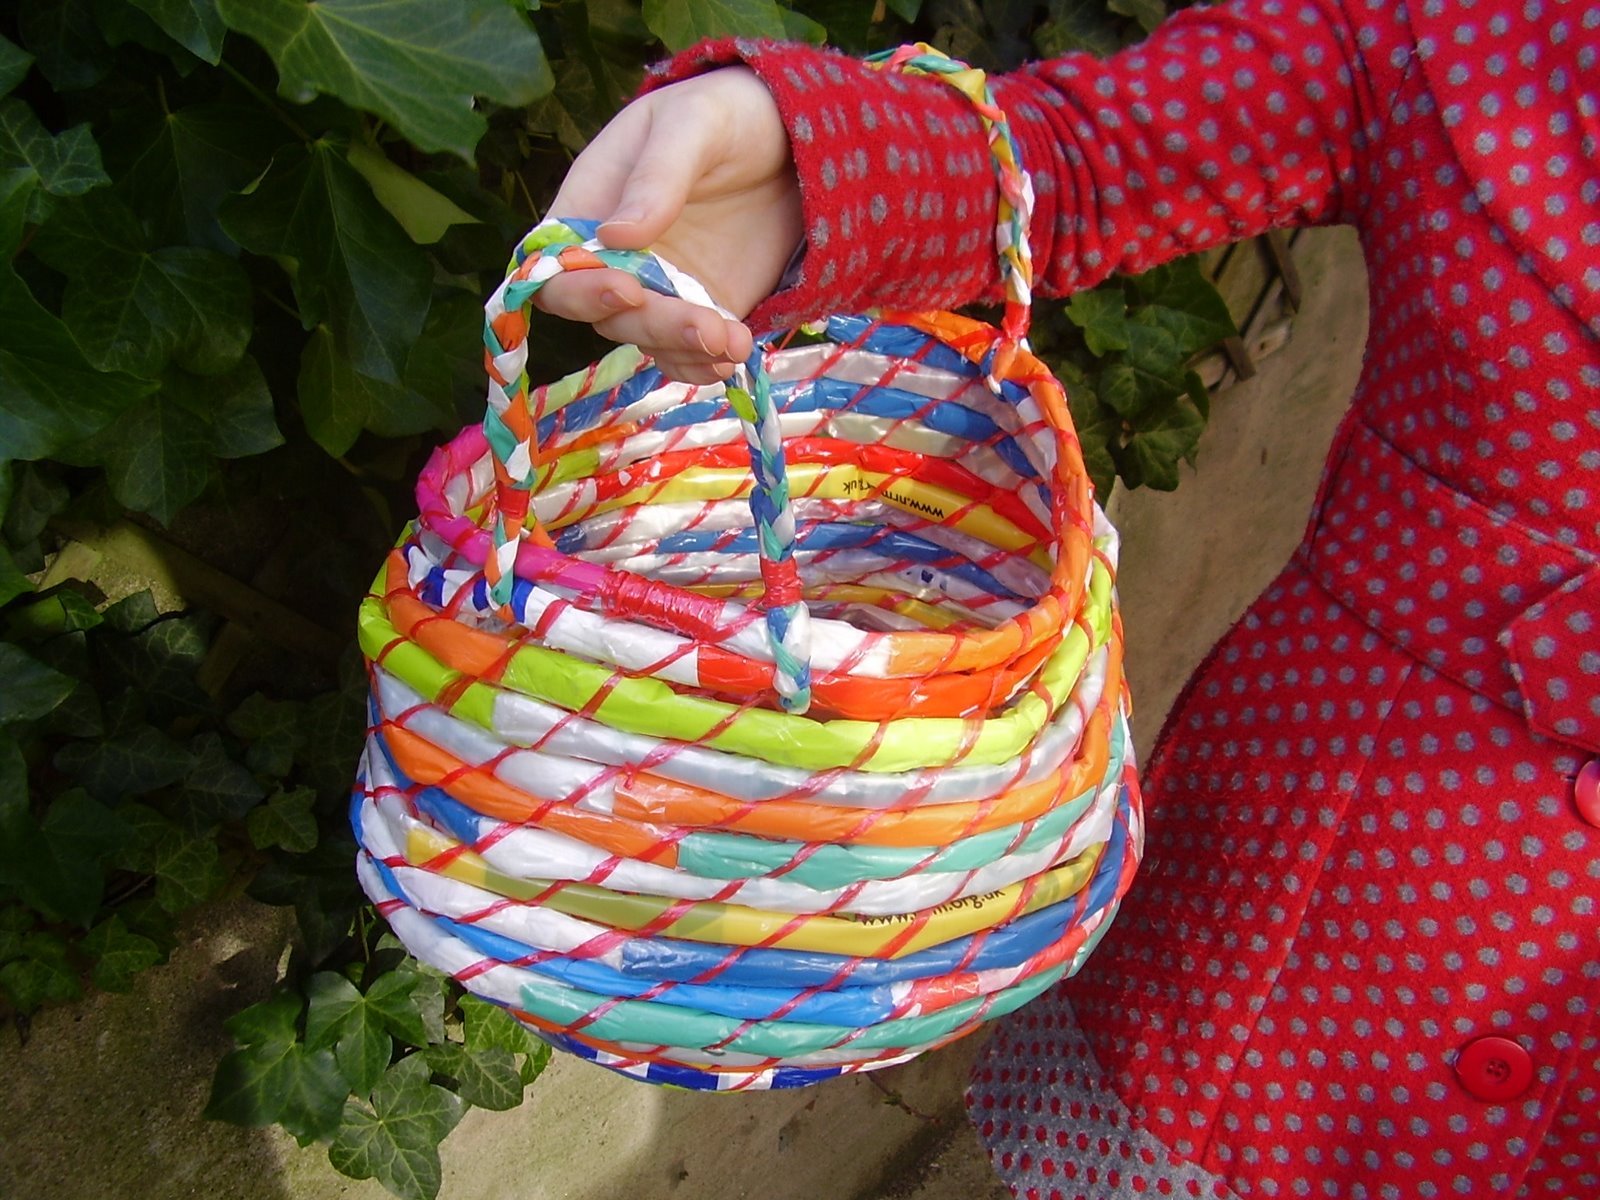 15 Fun DIY Projects You Can Make With Excess Plastic Bags